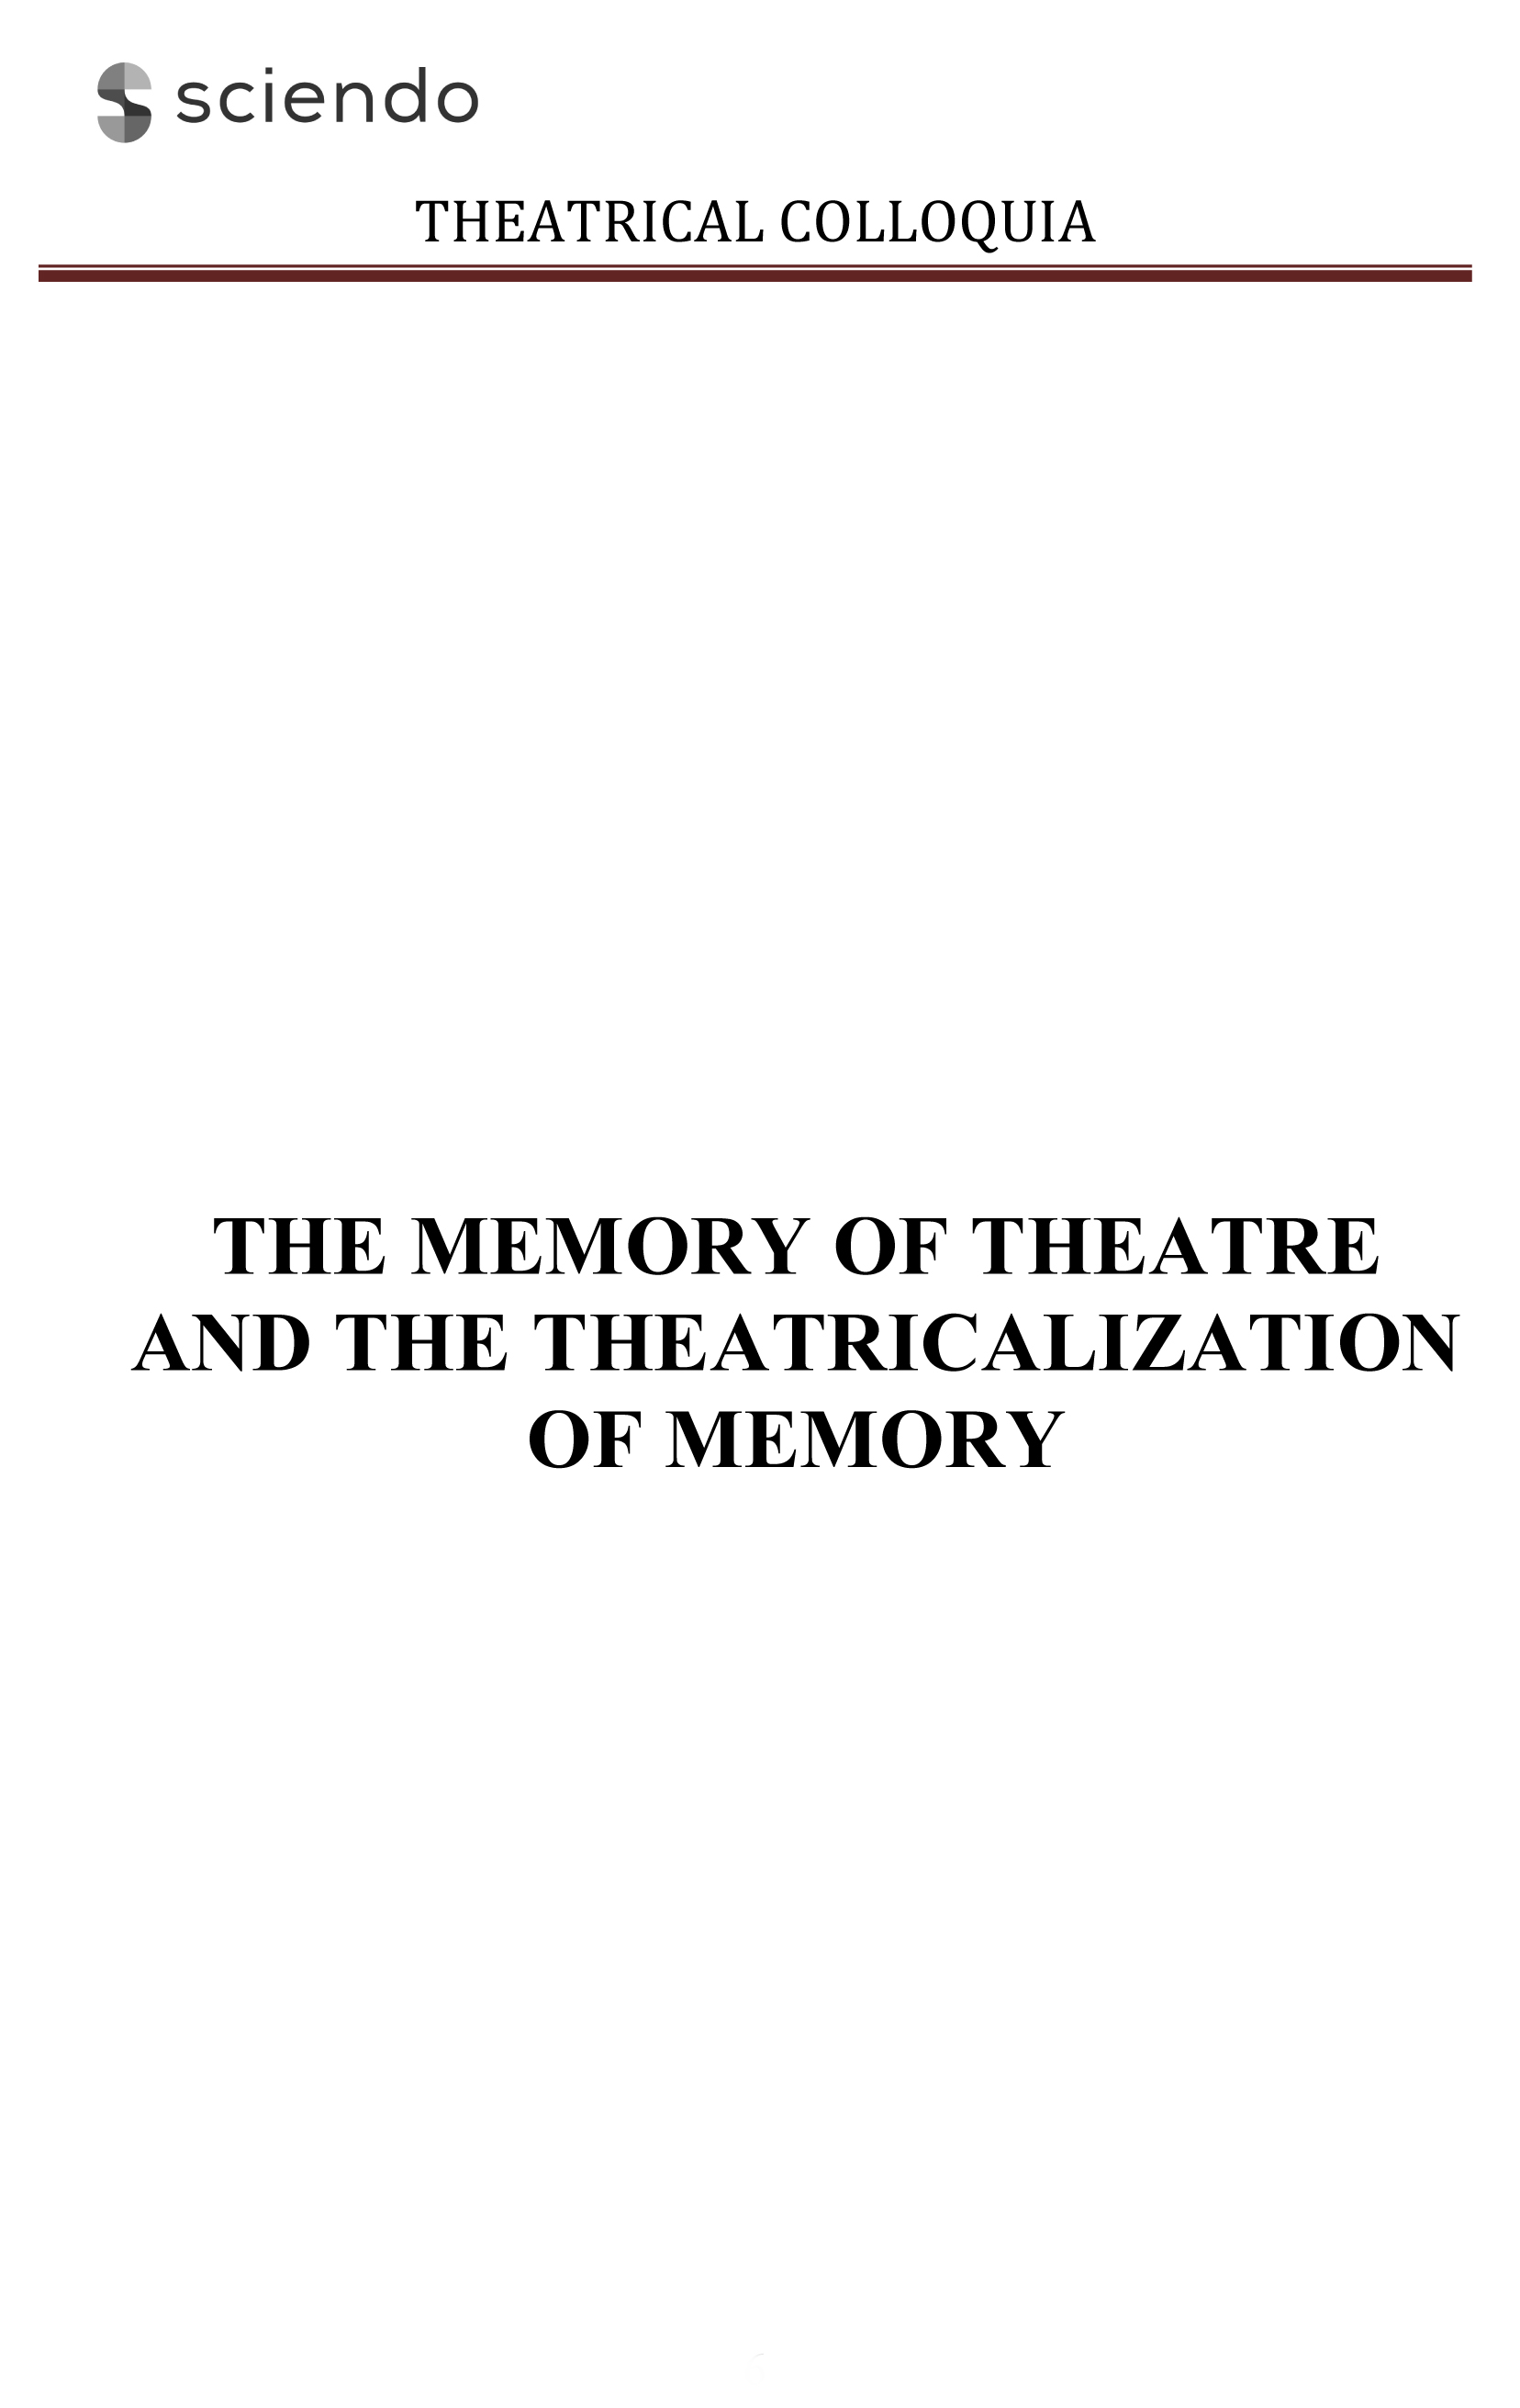 The Memory of Theatre. Theatricalization of Memory Cover Image